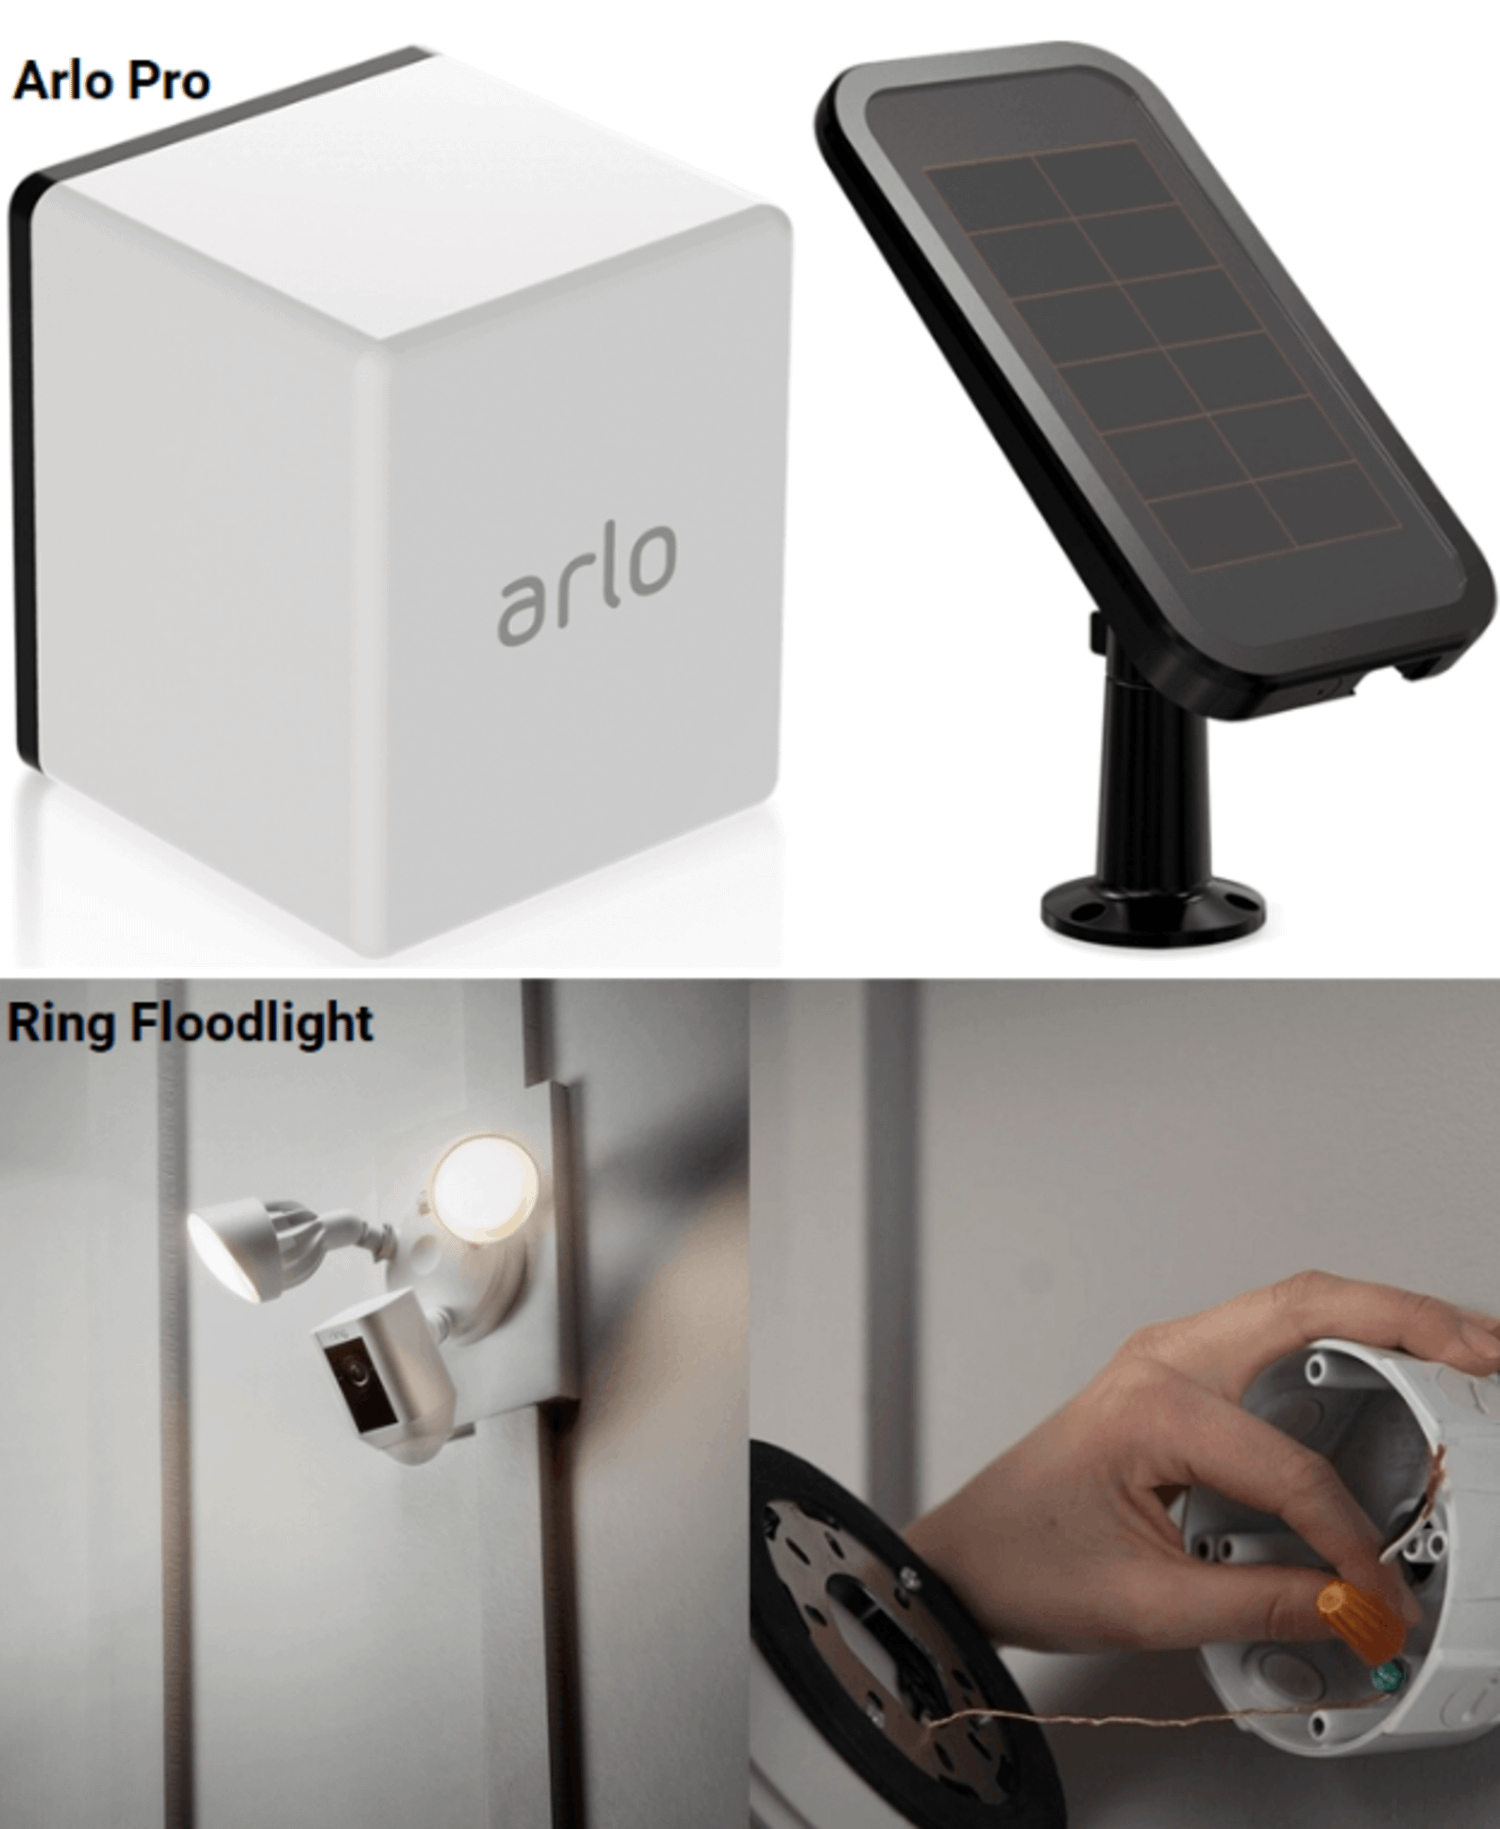 A picture shows Arlo Pro (up) and Ring Floodlight (down)